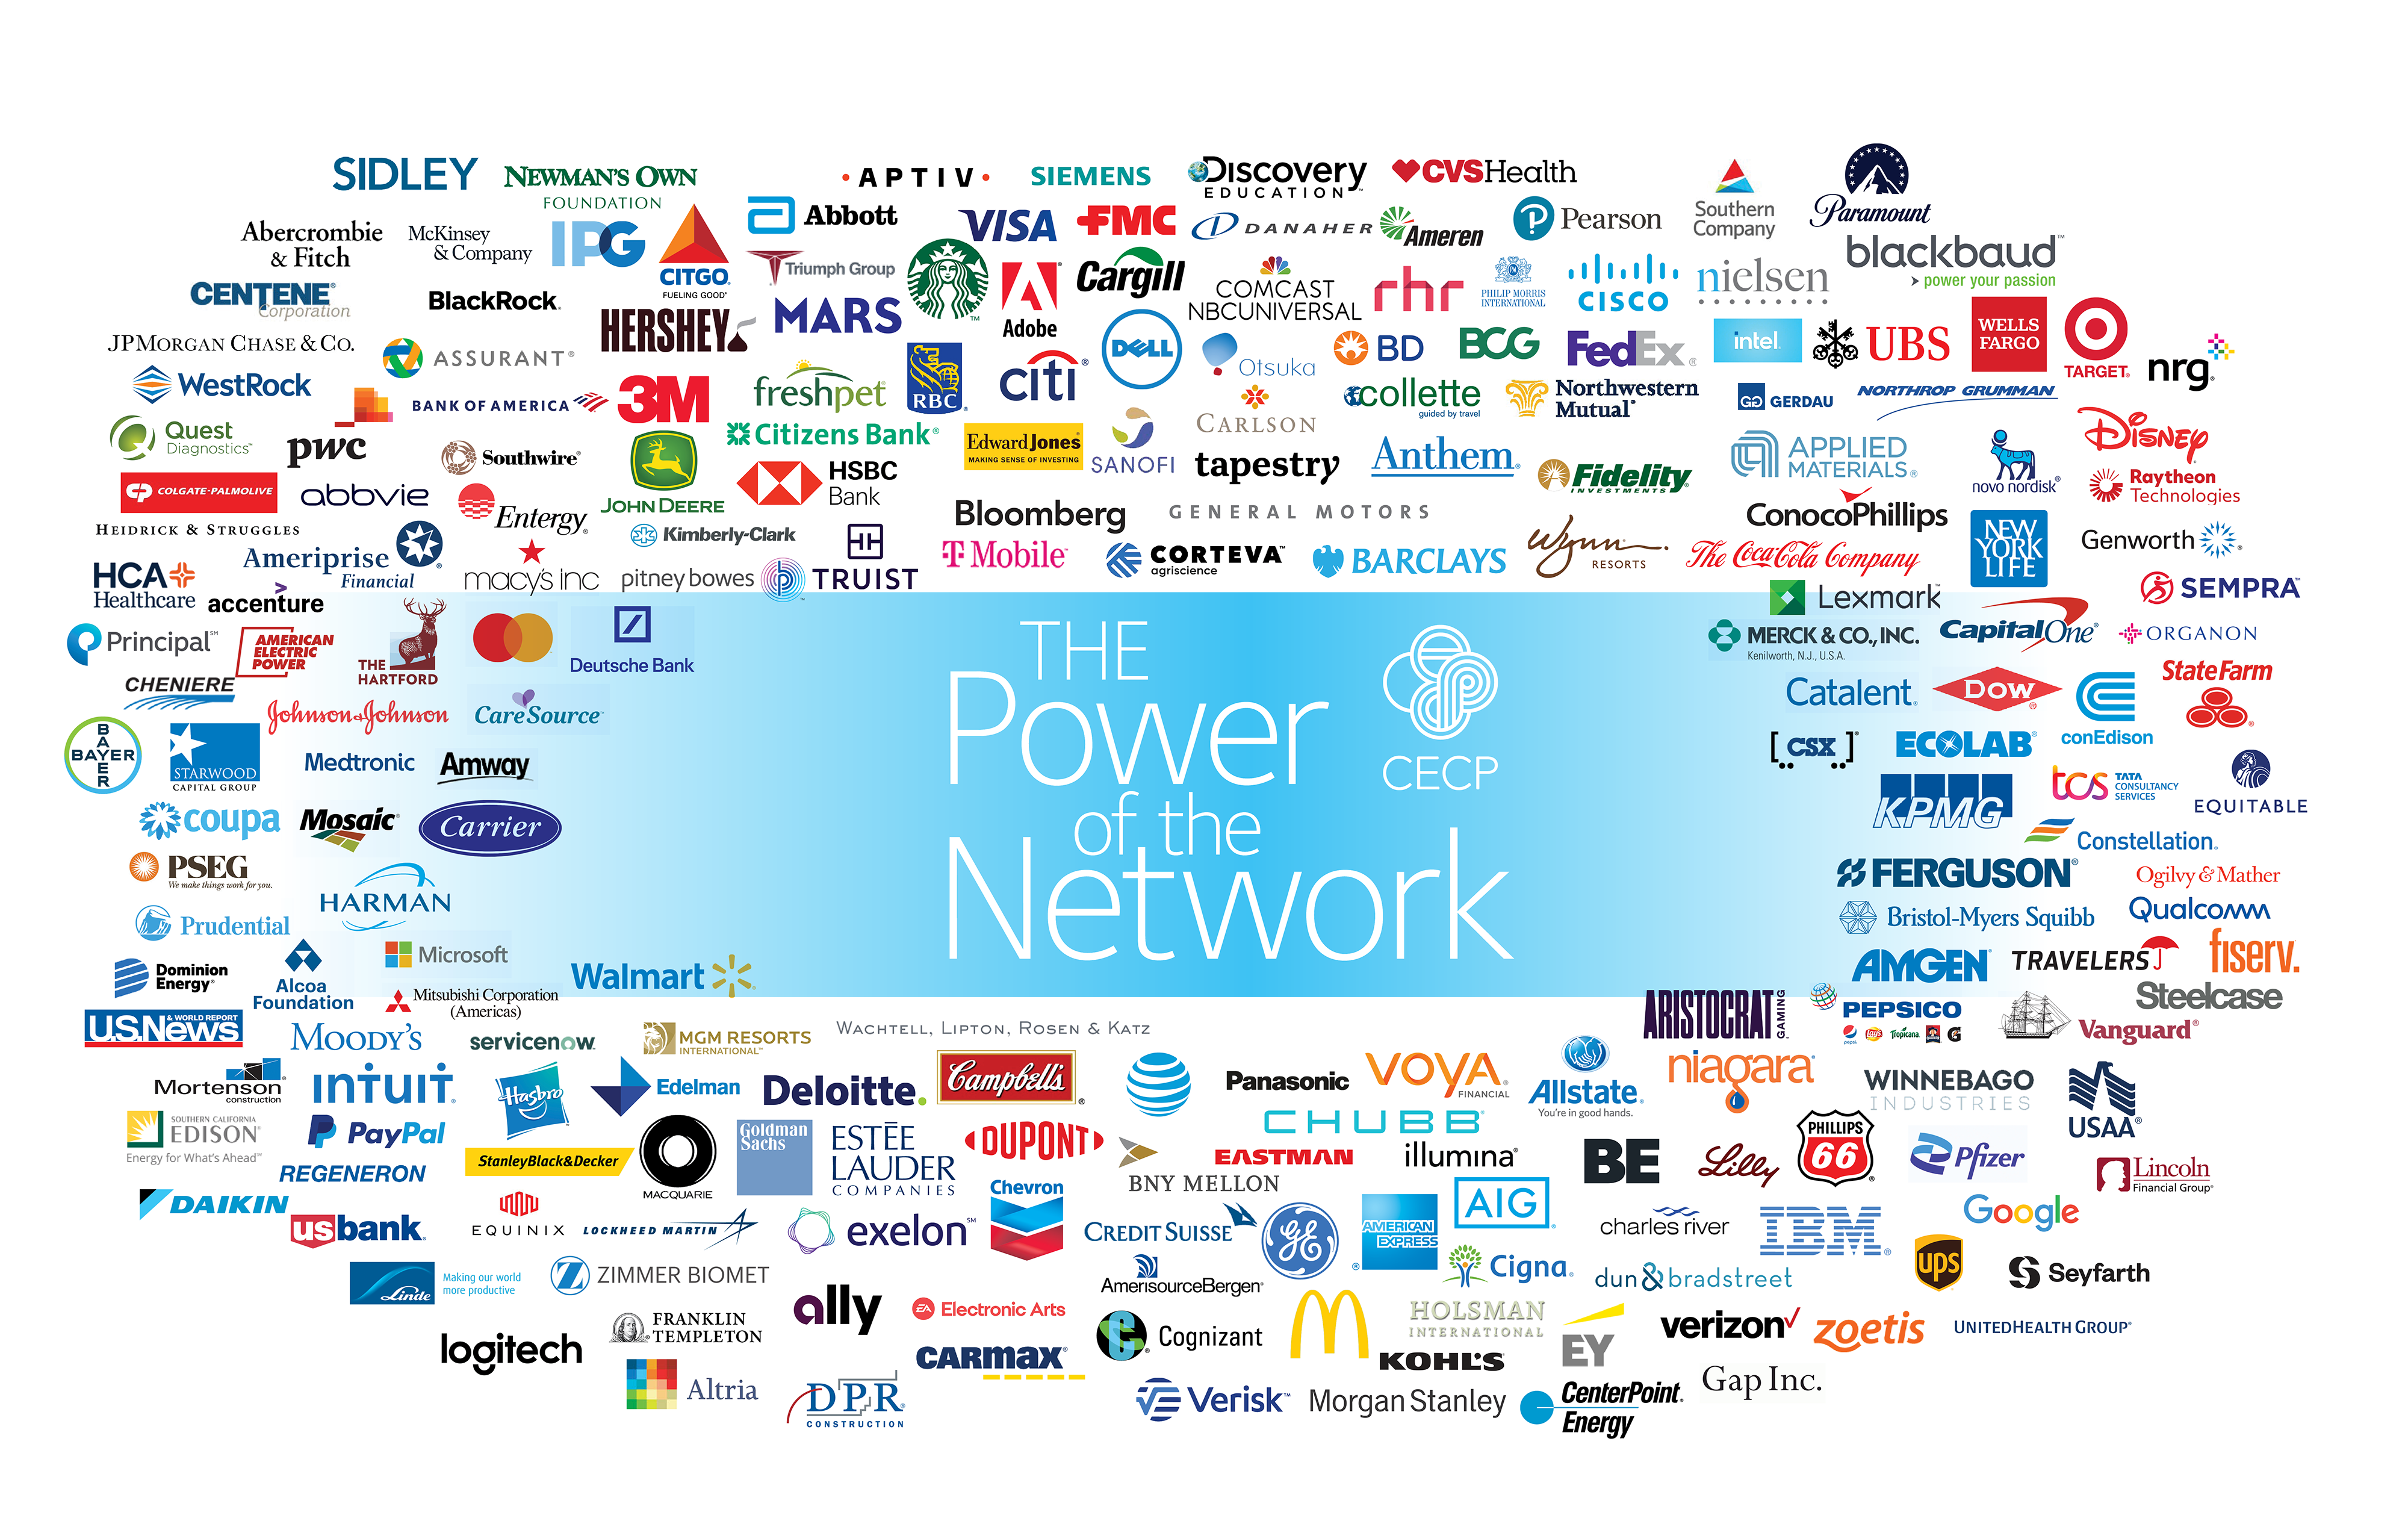 The Power of the Network: CECP